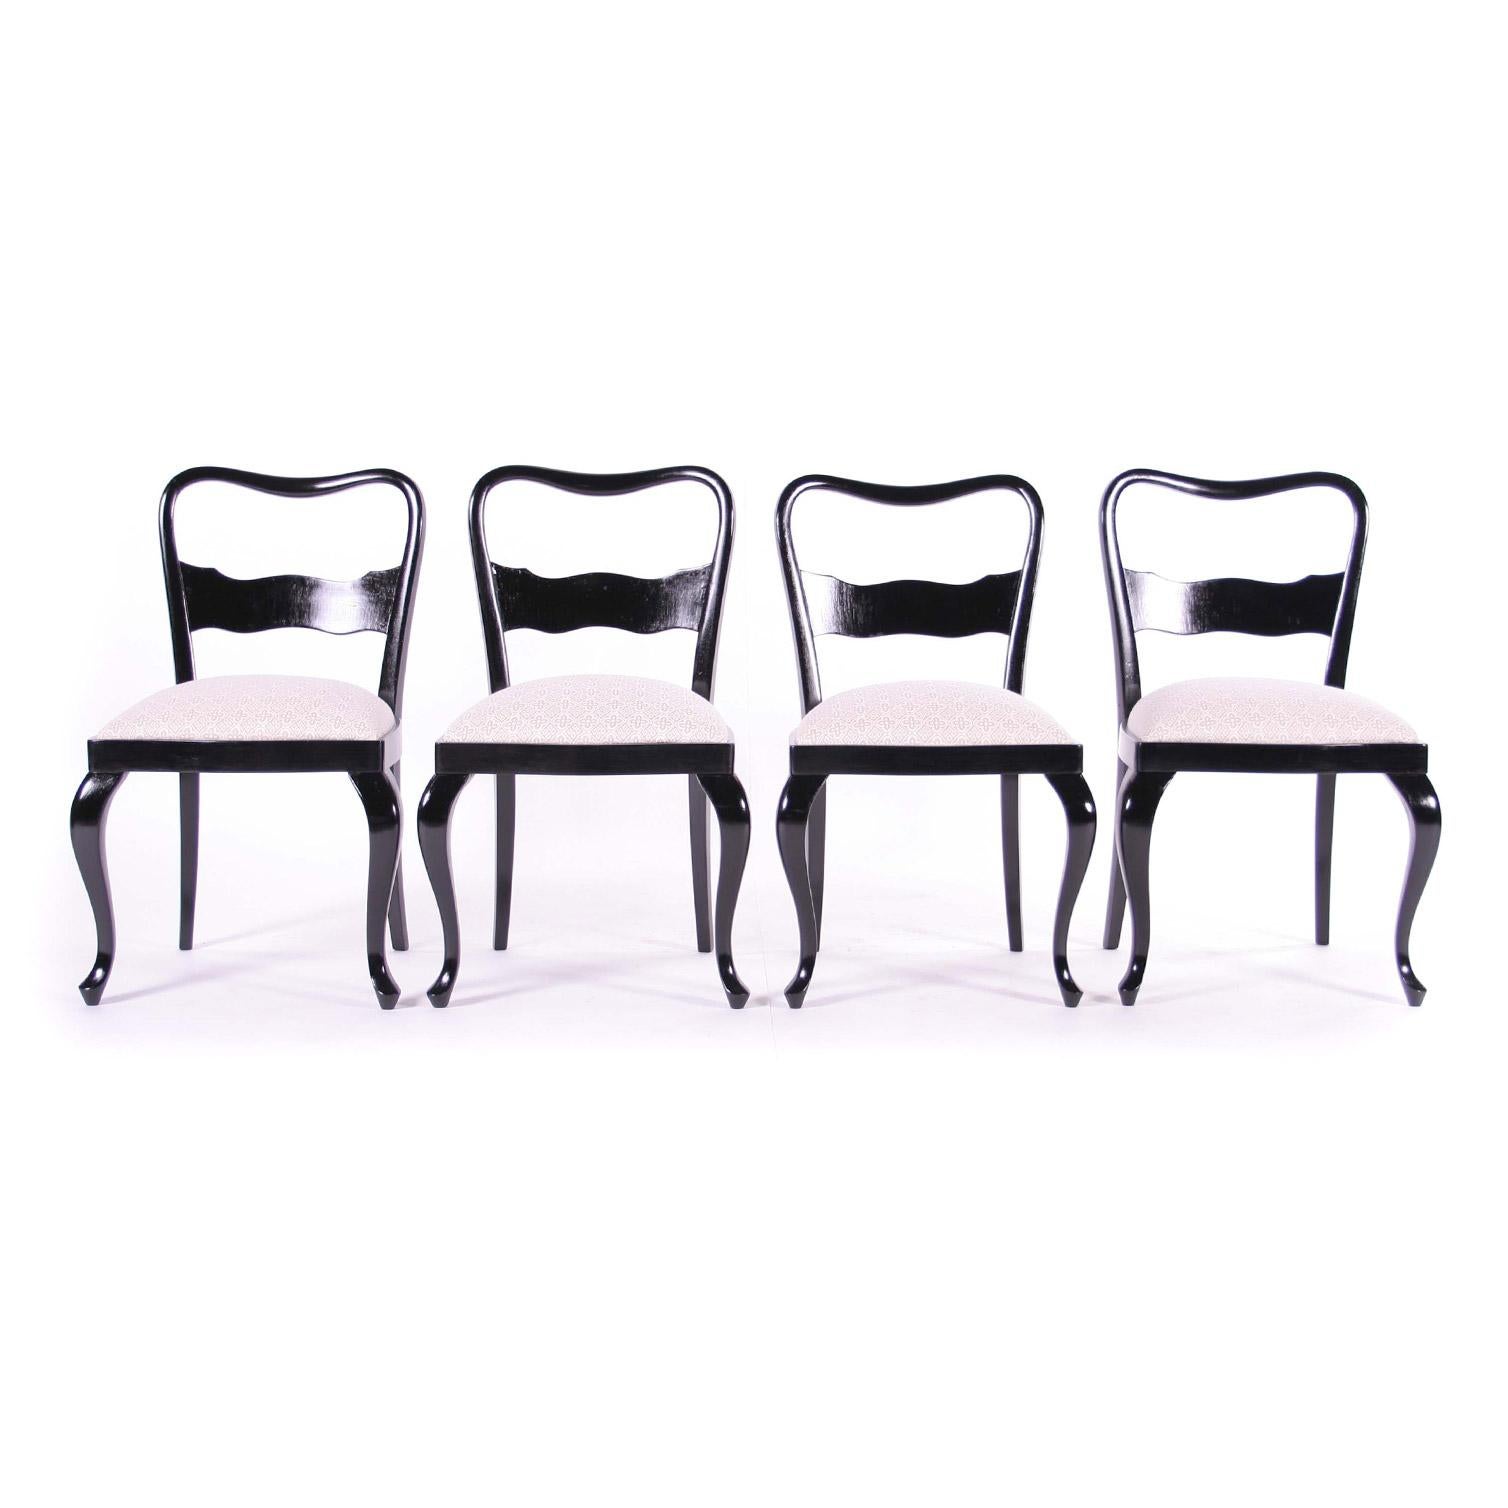 Original piece of furniture after renovation.
Chairs for ceremonial occasions or representative spaces. Tall comfortable seat with beautiful and luxurious white fabric. The elegant backrest and the distinctive rounded legs underline the exclusivity